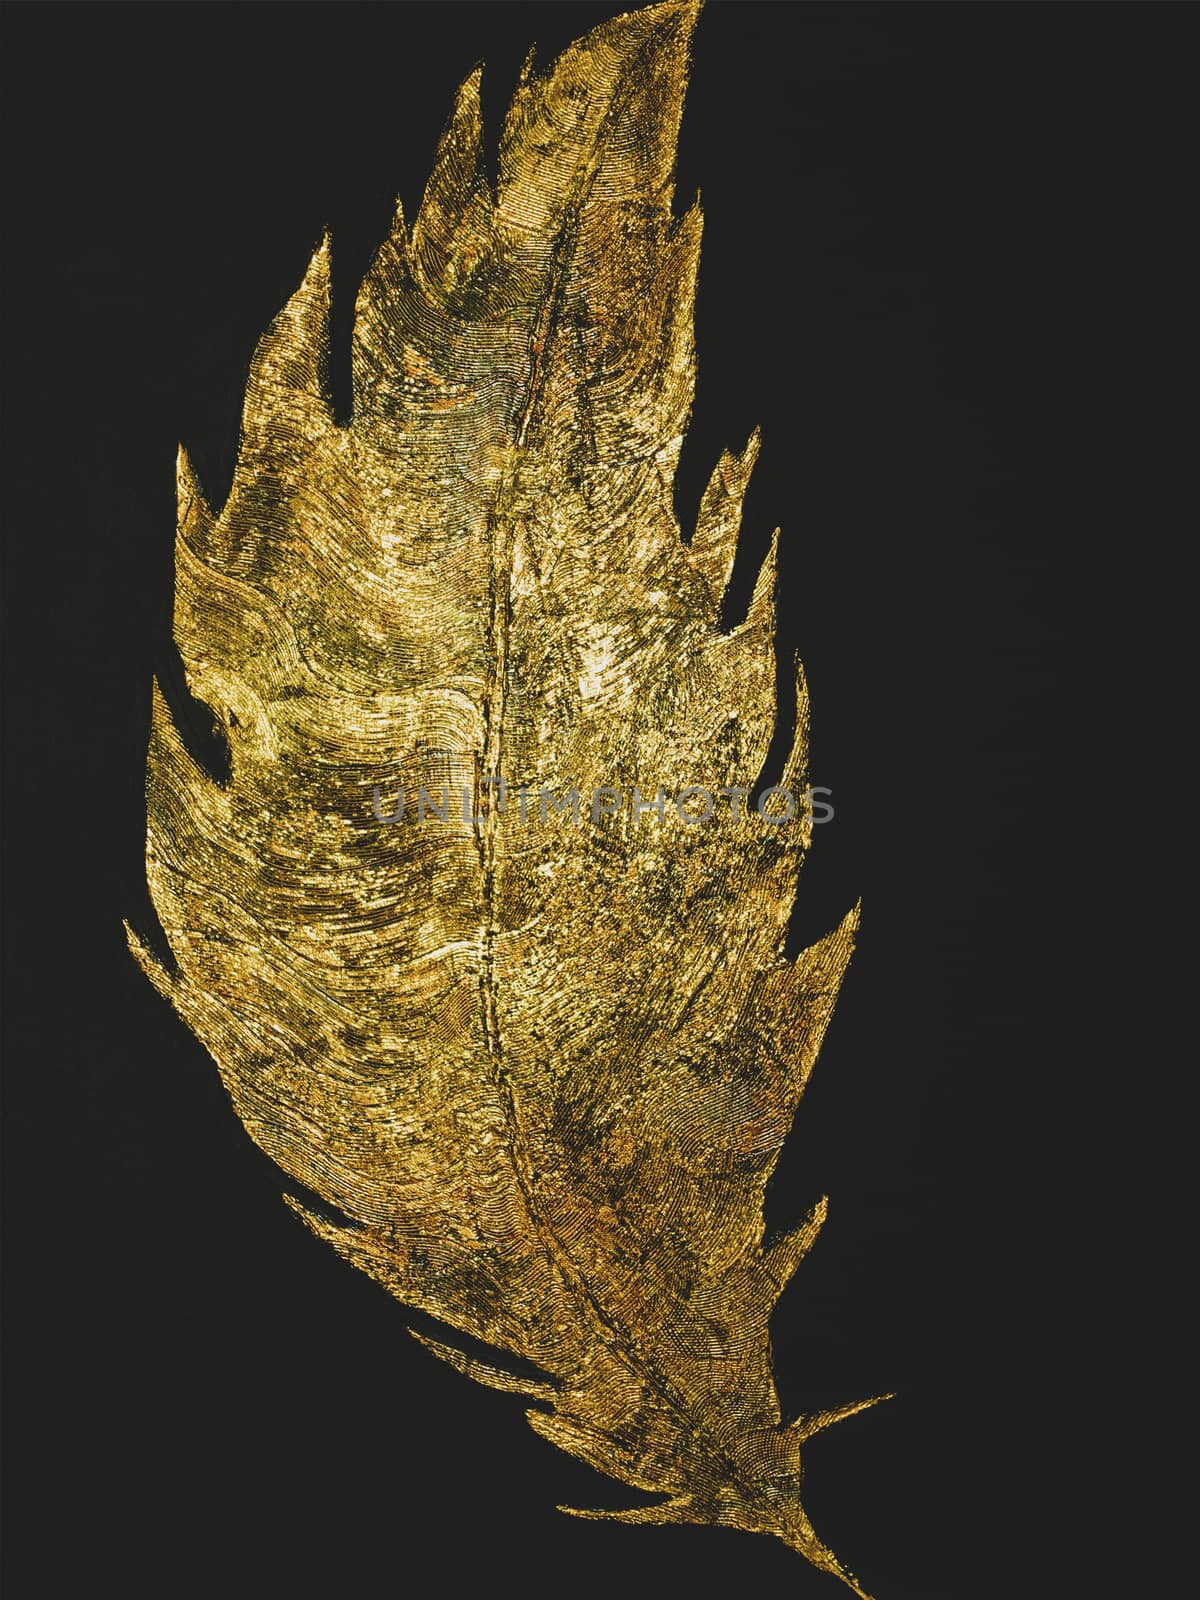 Metal Golden feather on black background. Gold glitter texture. Abstract painting. Art object